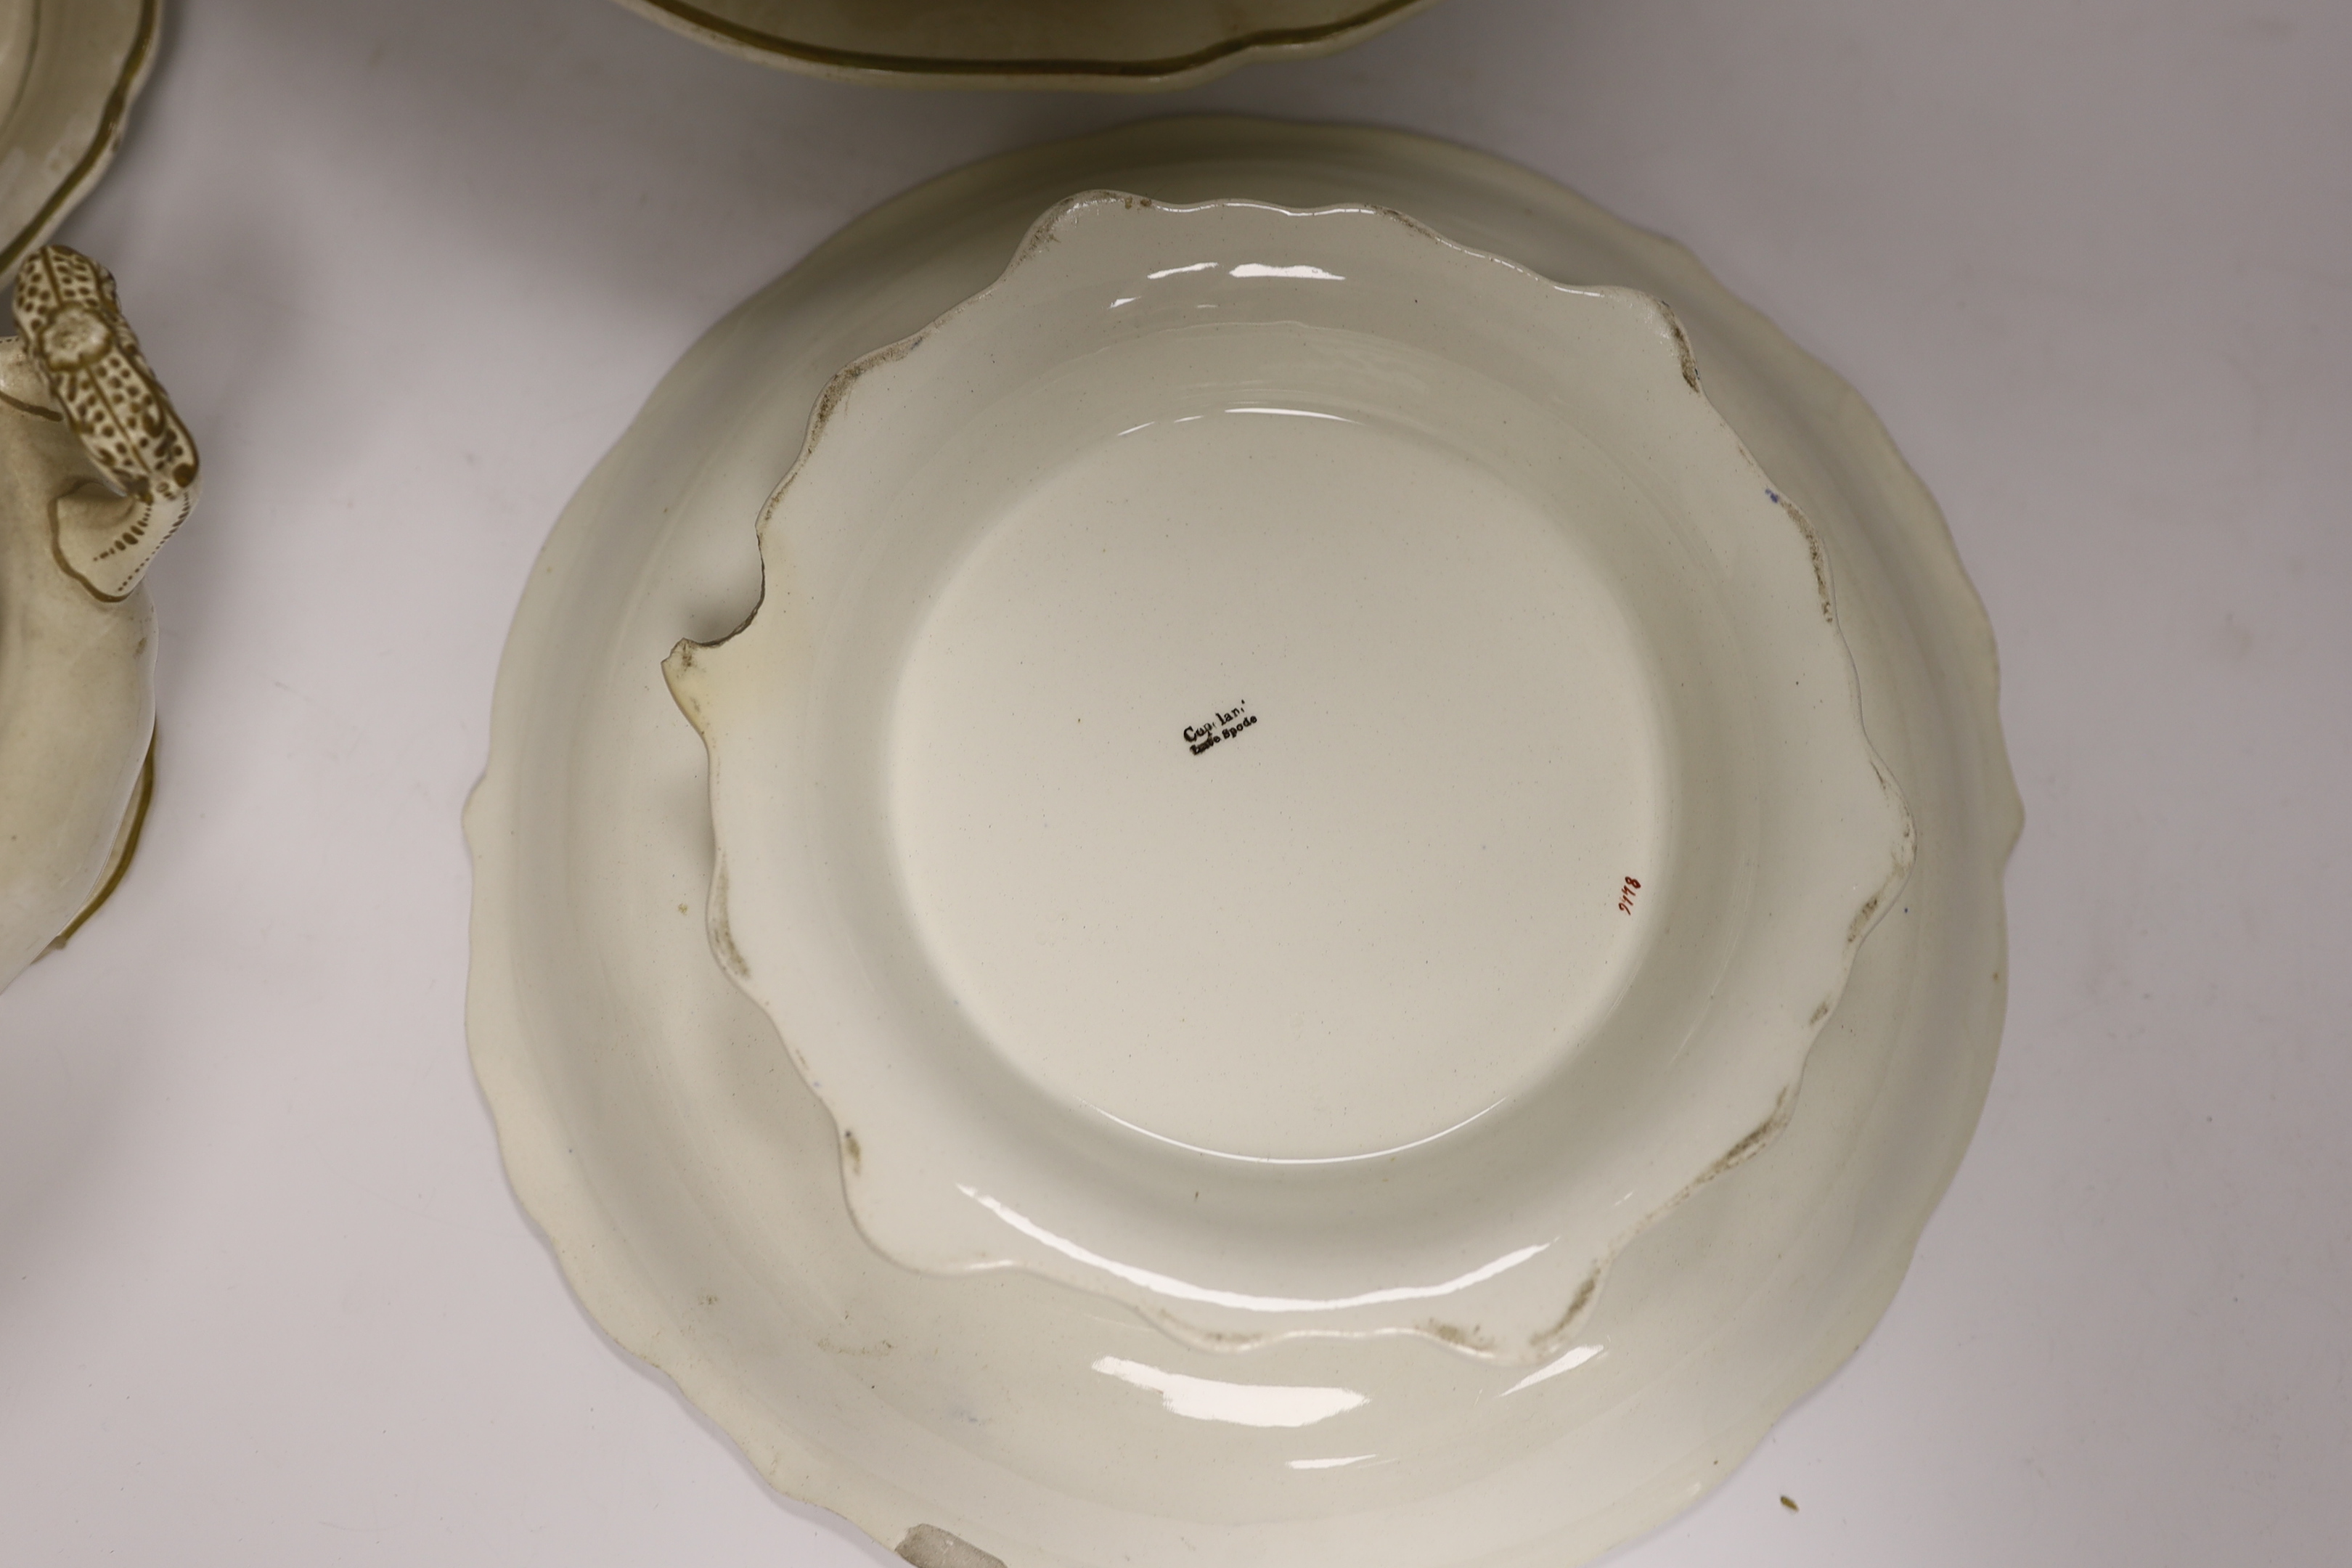 Copeland late Spode crested part dinner set comprising tureen and stand, bowl and stand and two - Image 5 of 5